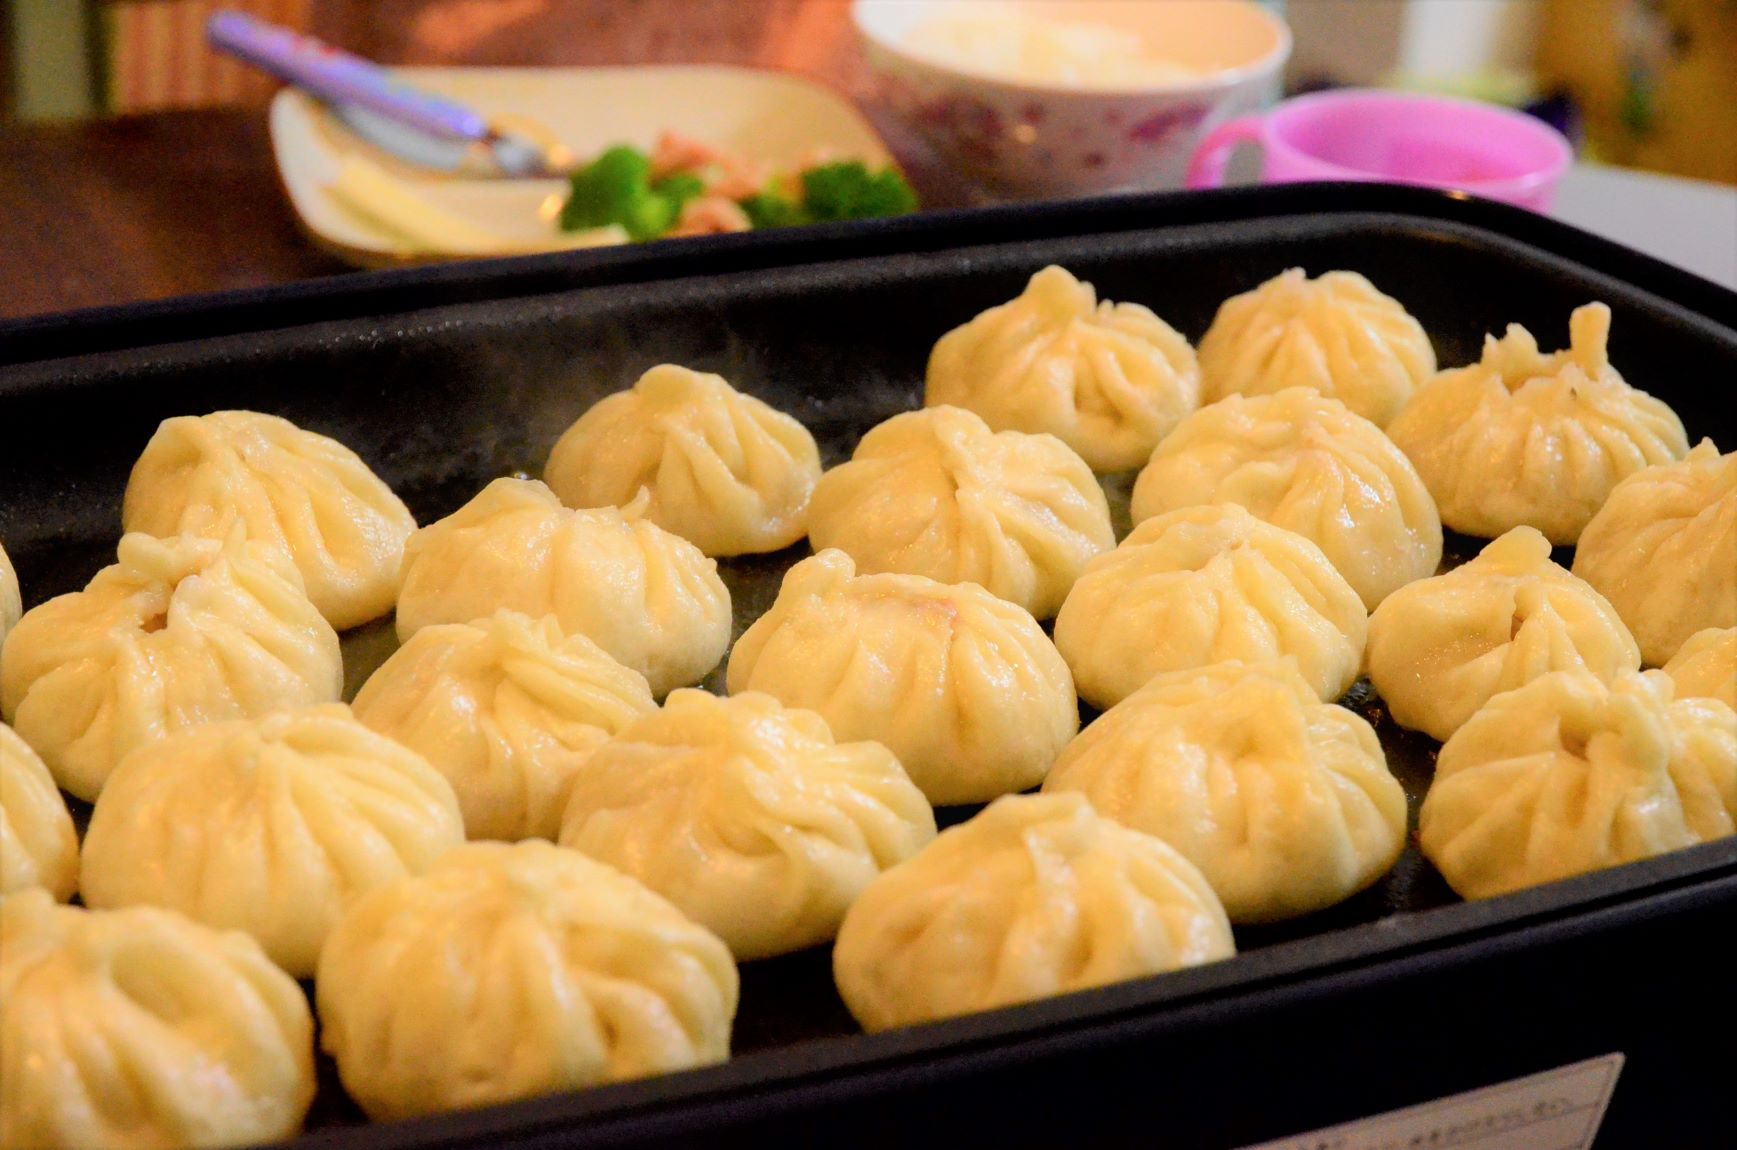 Roasted dumplings with plenty of gravy mass-produced on a hot plate